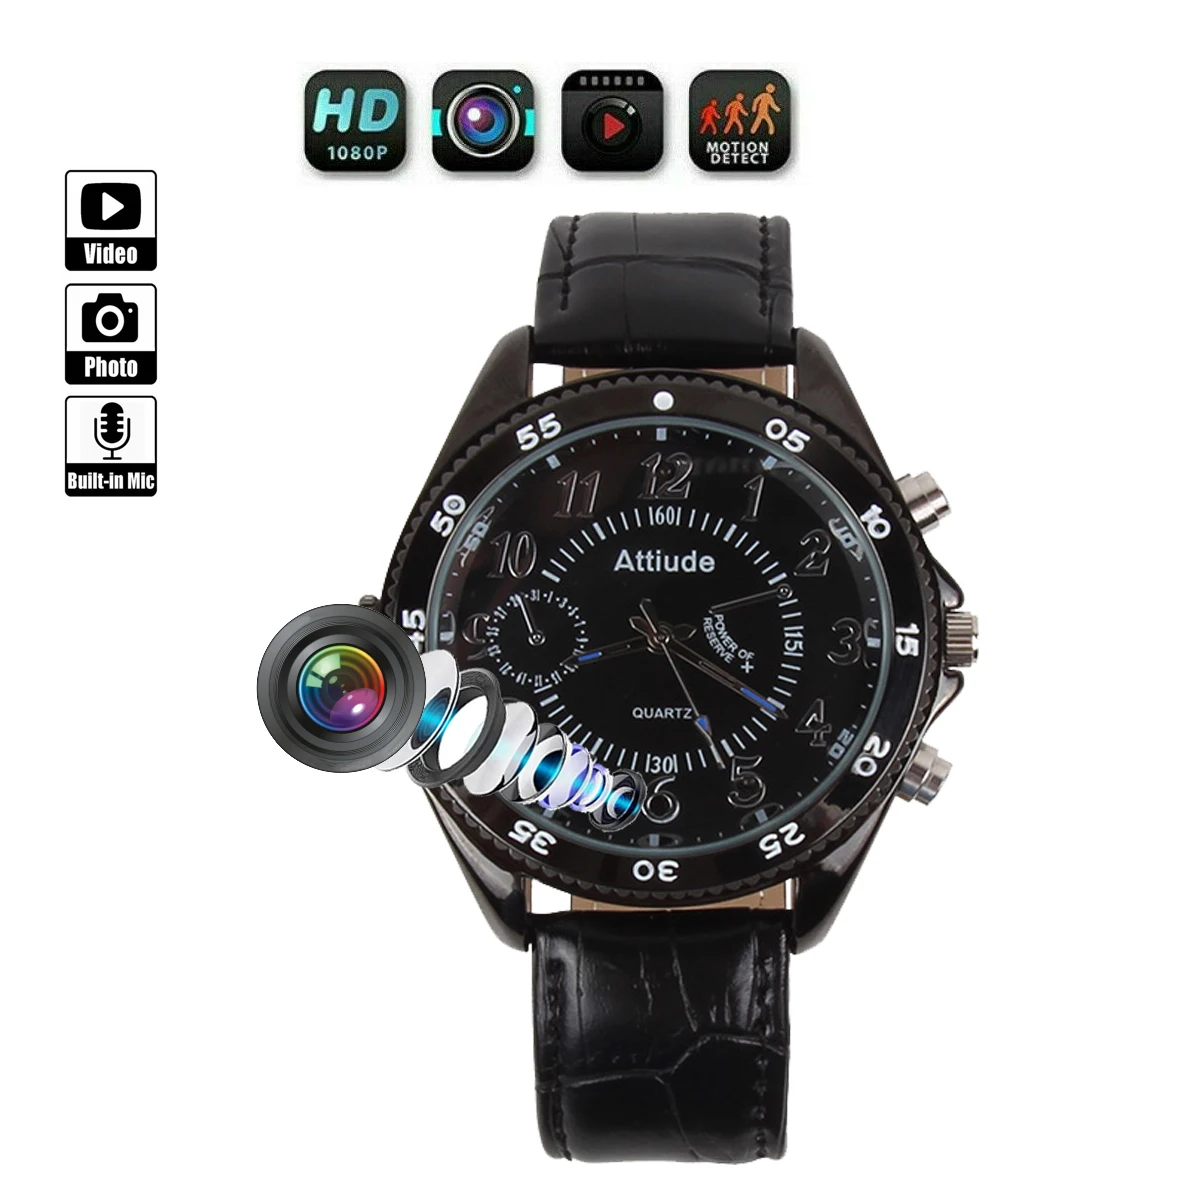 HD 1080P Video Recorder Mini Camera Watch with Cameras Voice Recorder Micro Camcorder Action Cam Night Vision Sports Lens Men